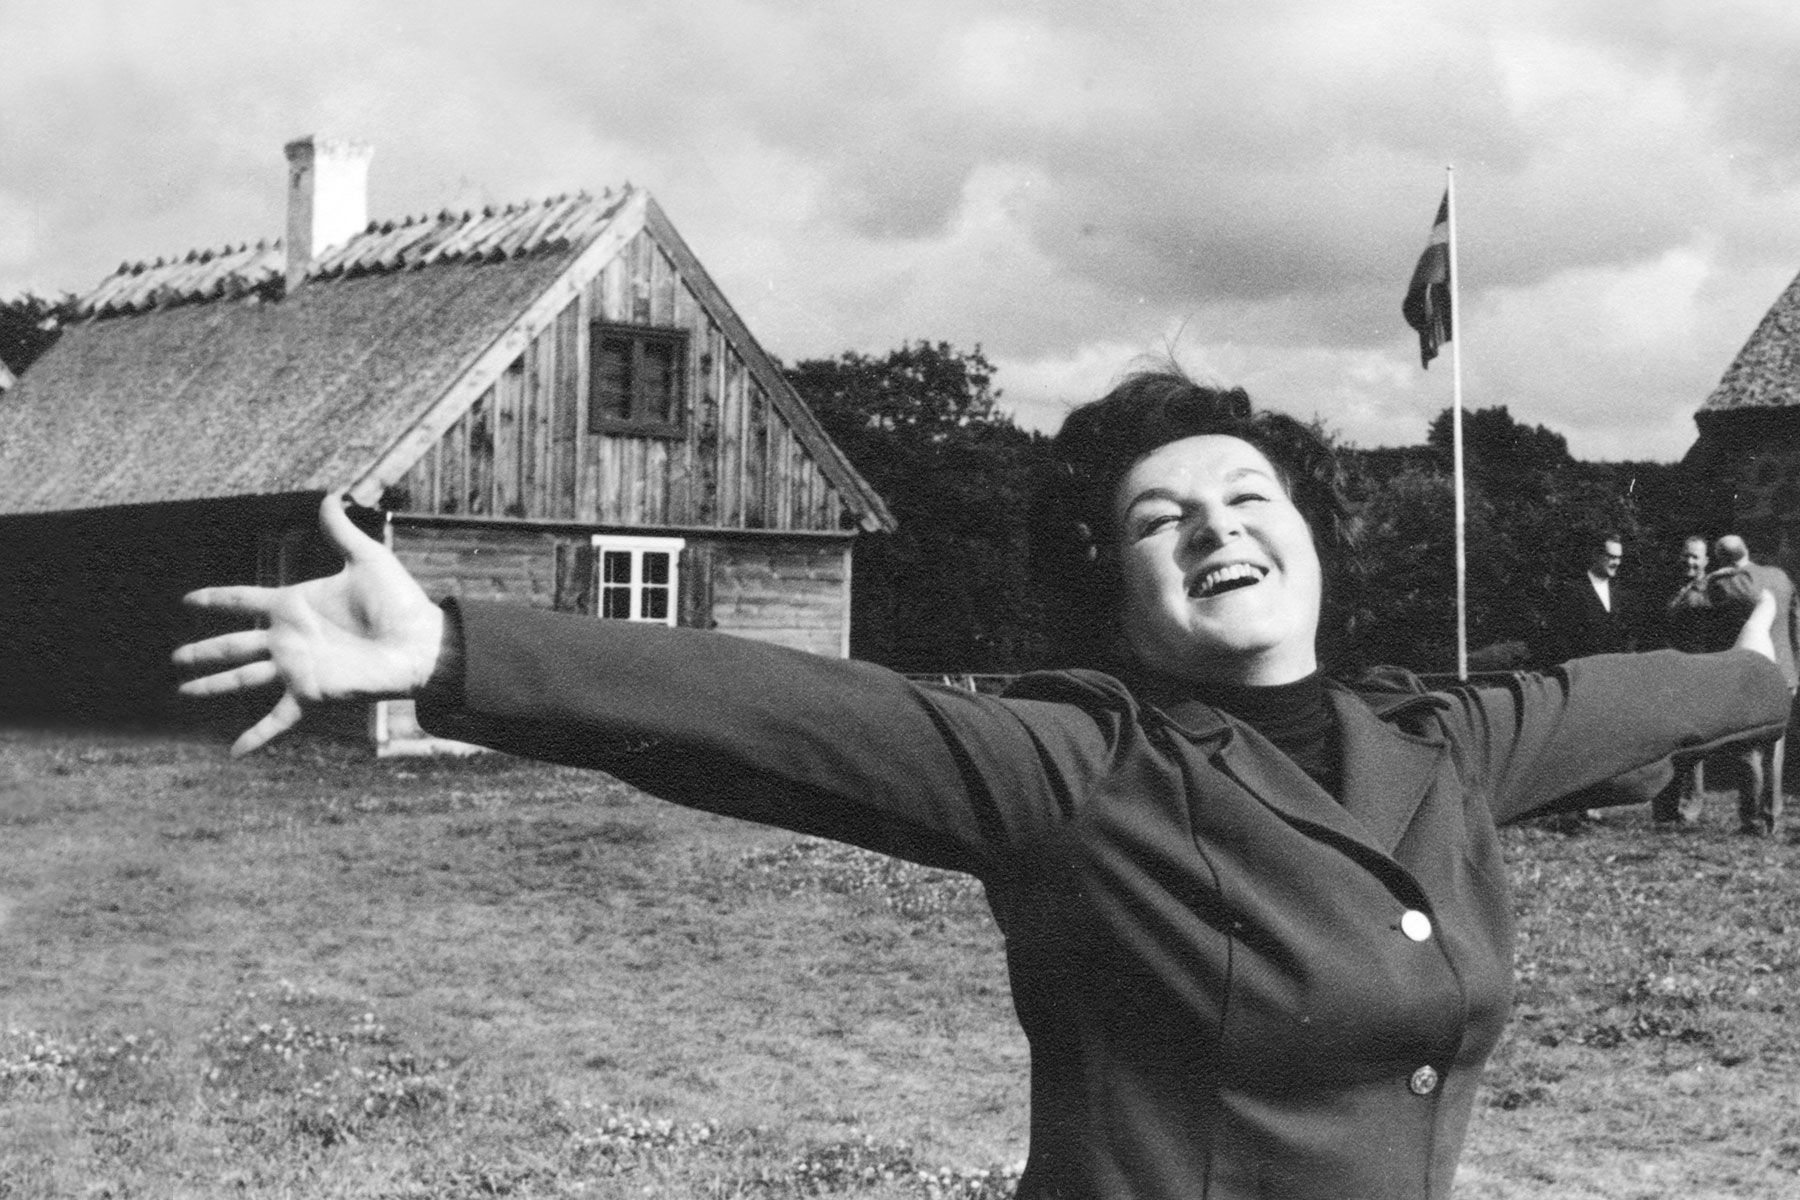 Birgit Nilsson stretches out her arms and enjoys life at her homestead in Boarp.